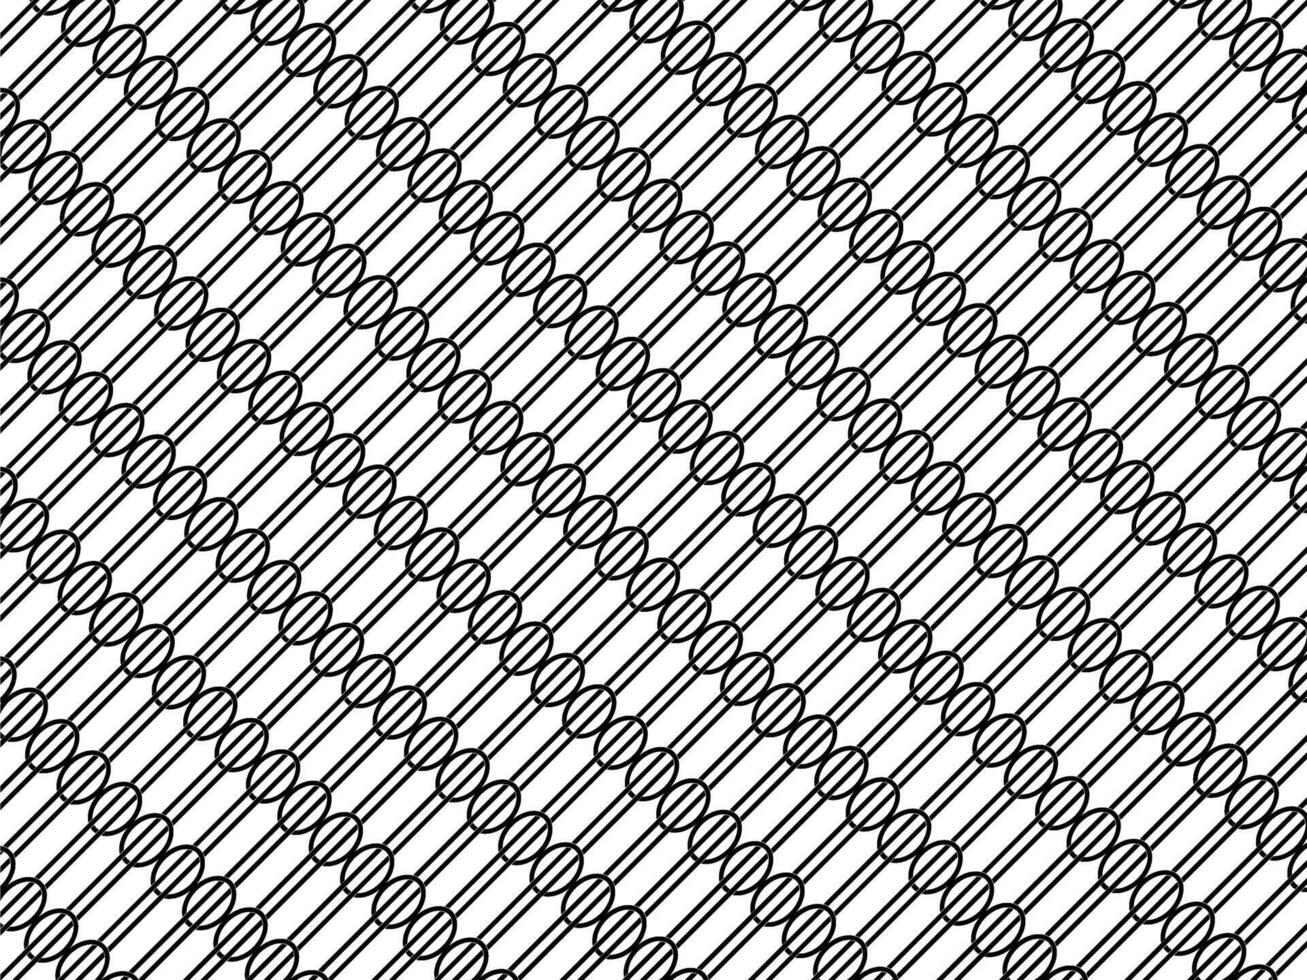 Stripe Line and Oval Shape Motifs Pattern, can use for Decoration, Wallpaper, Ornate, Background, Fabric, Textile, Fashion, Carpet, Tile, or Graphic Design Element. Vector Illustration